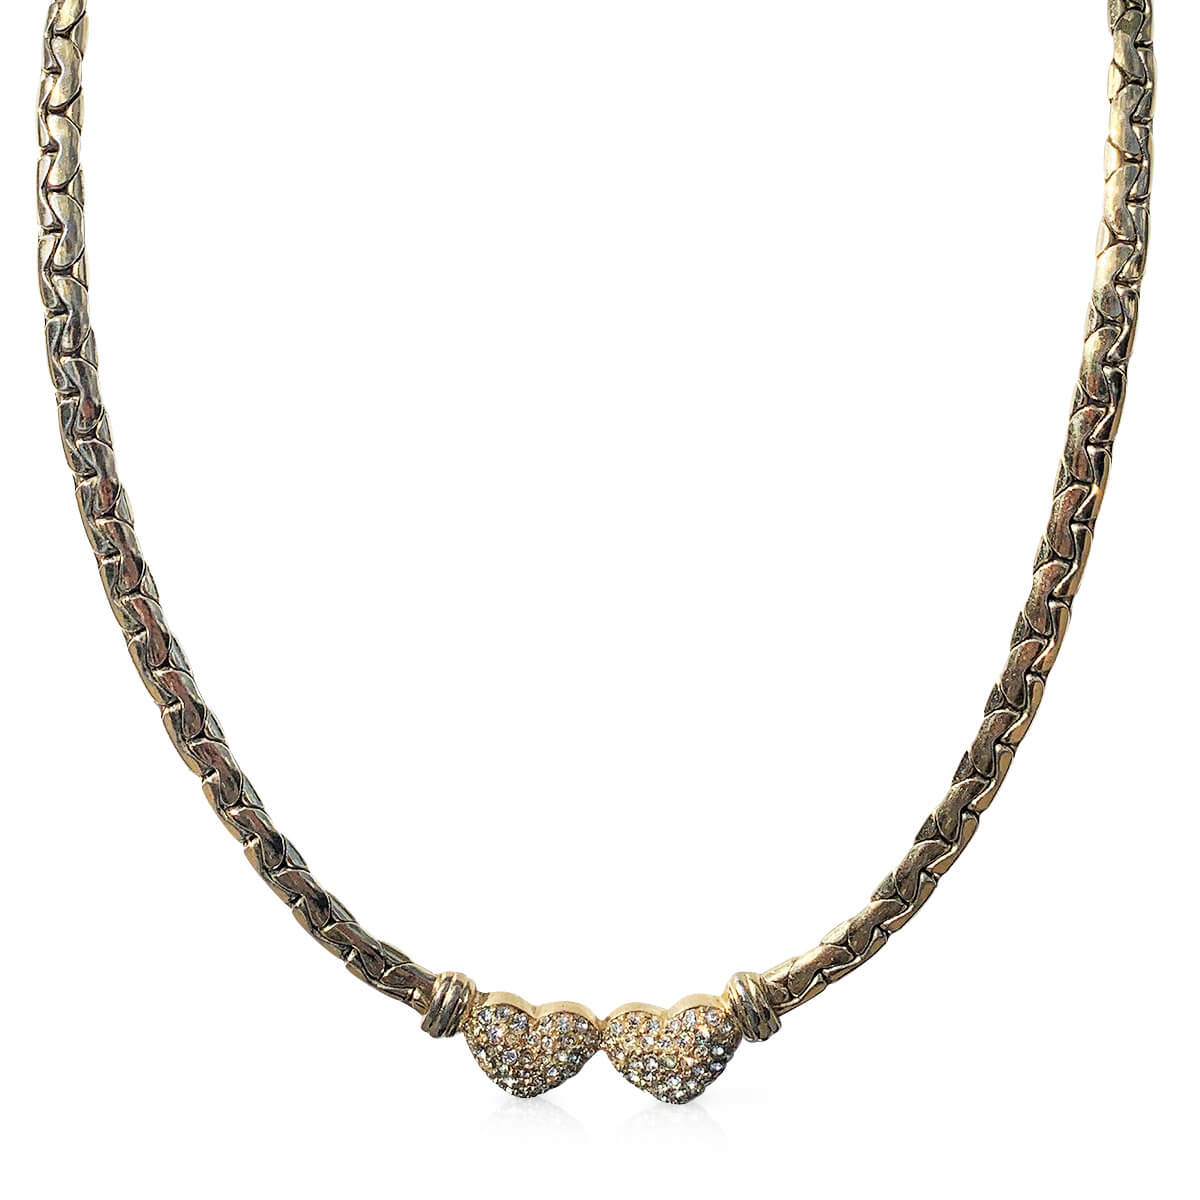 Grosse for Christian Dior gold plated hearts necklace